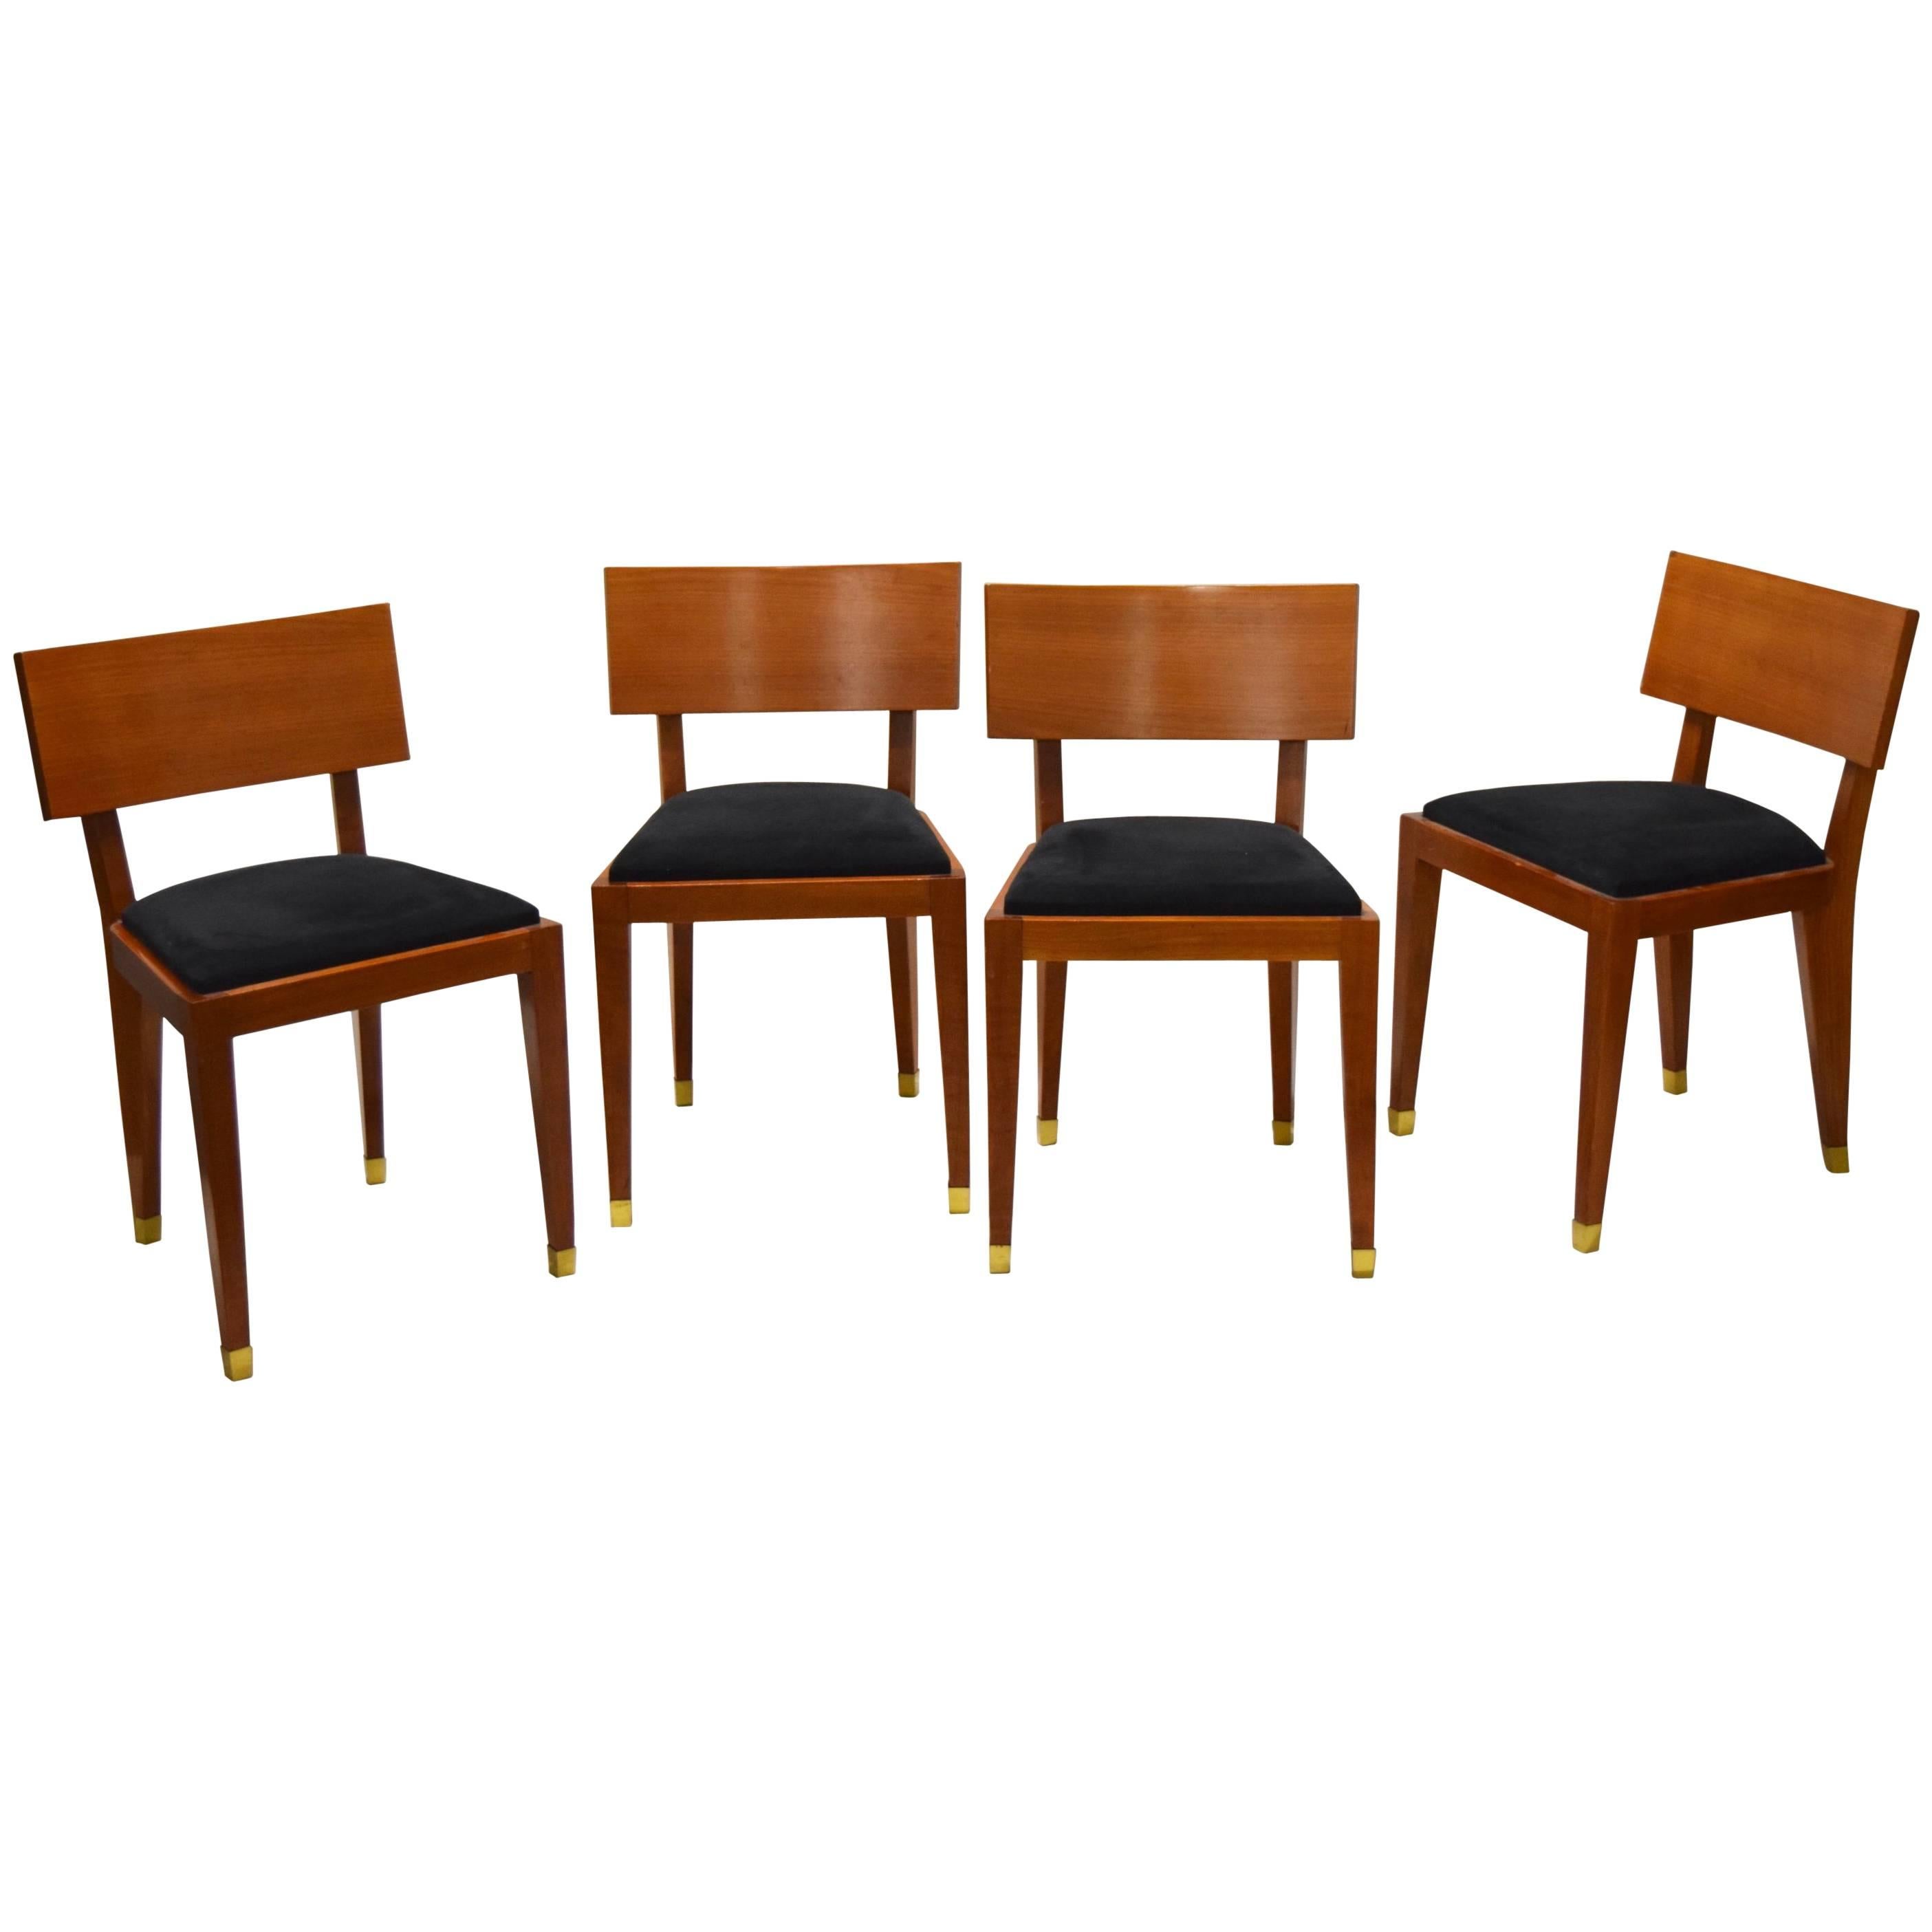 Four Fruitwood Dining Chairs, France Circa 1950